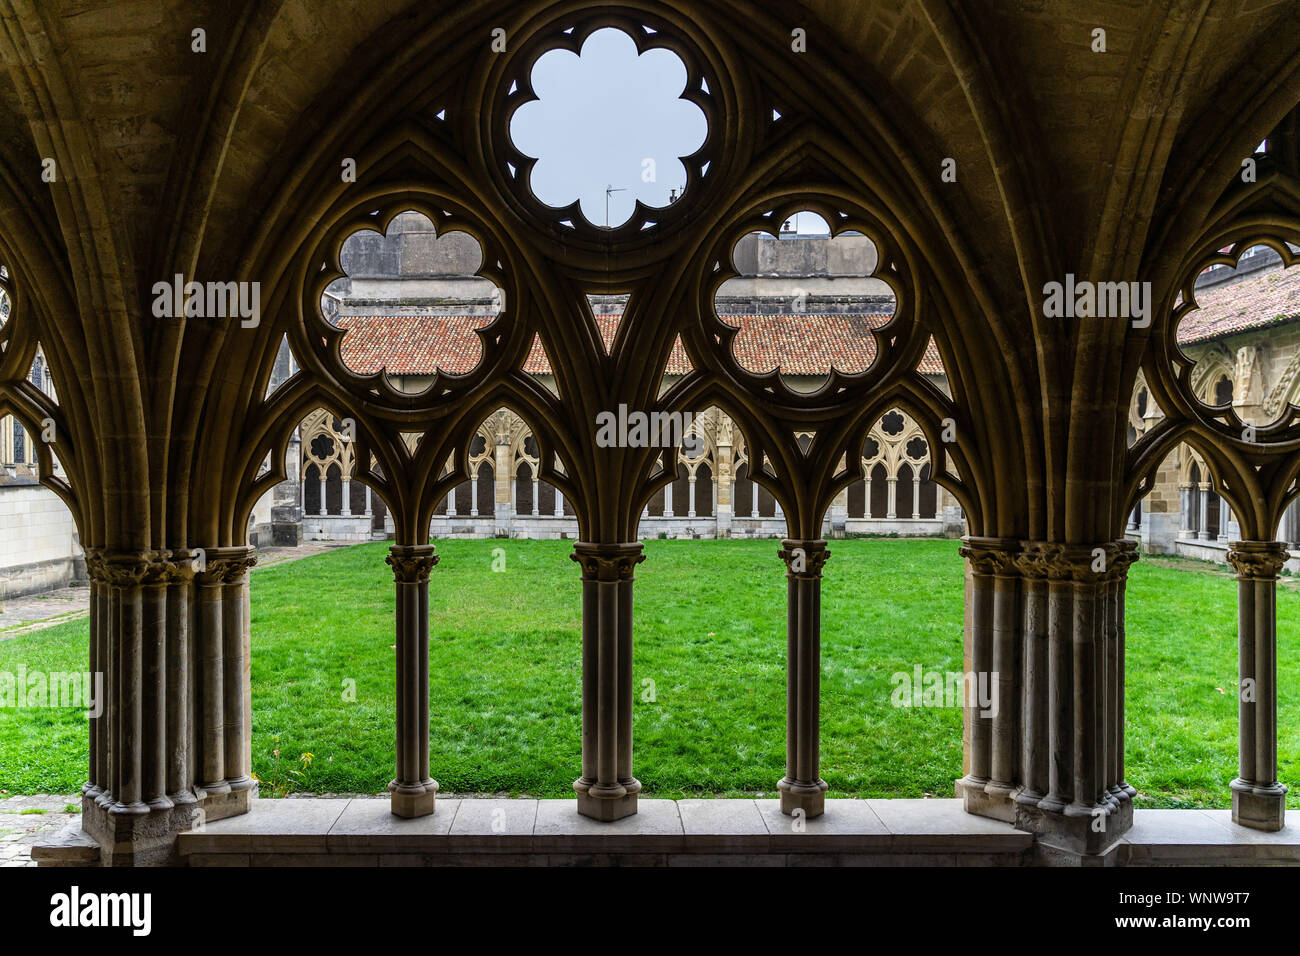 Gothic style decorations in the cloister of Bayonne Cathedral (Cathedral Sainte-Marie), France Stock Photo